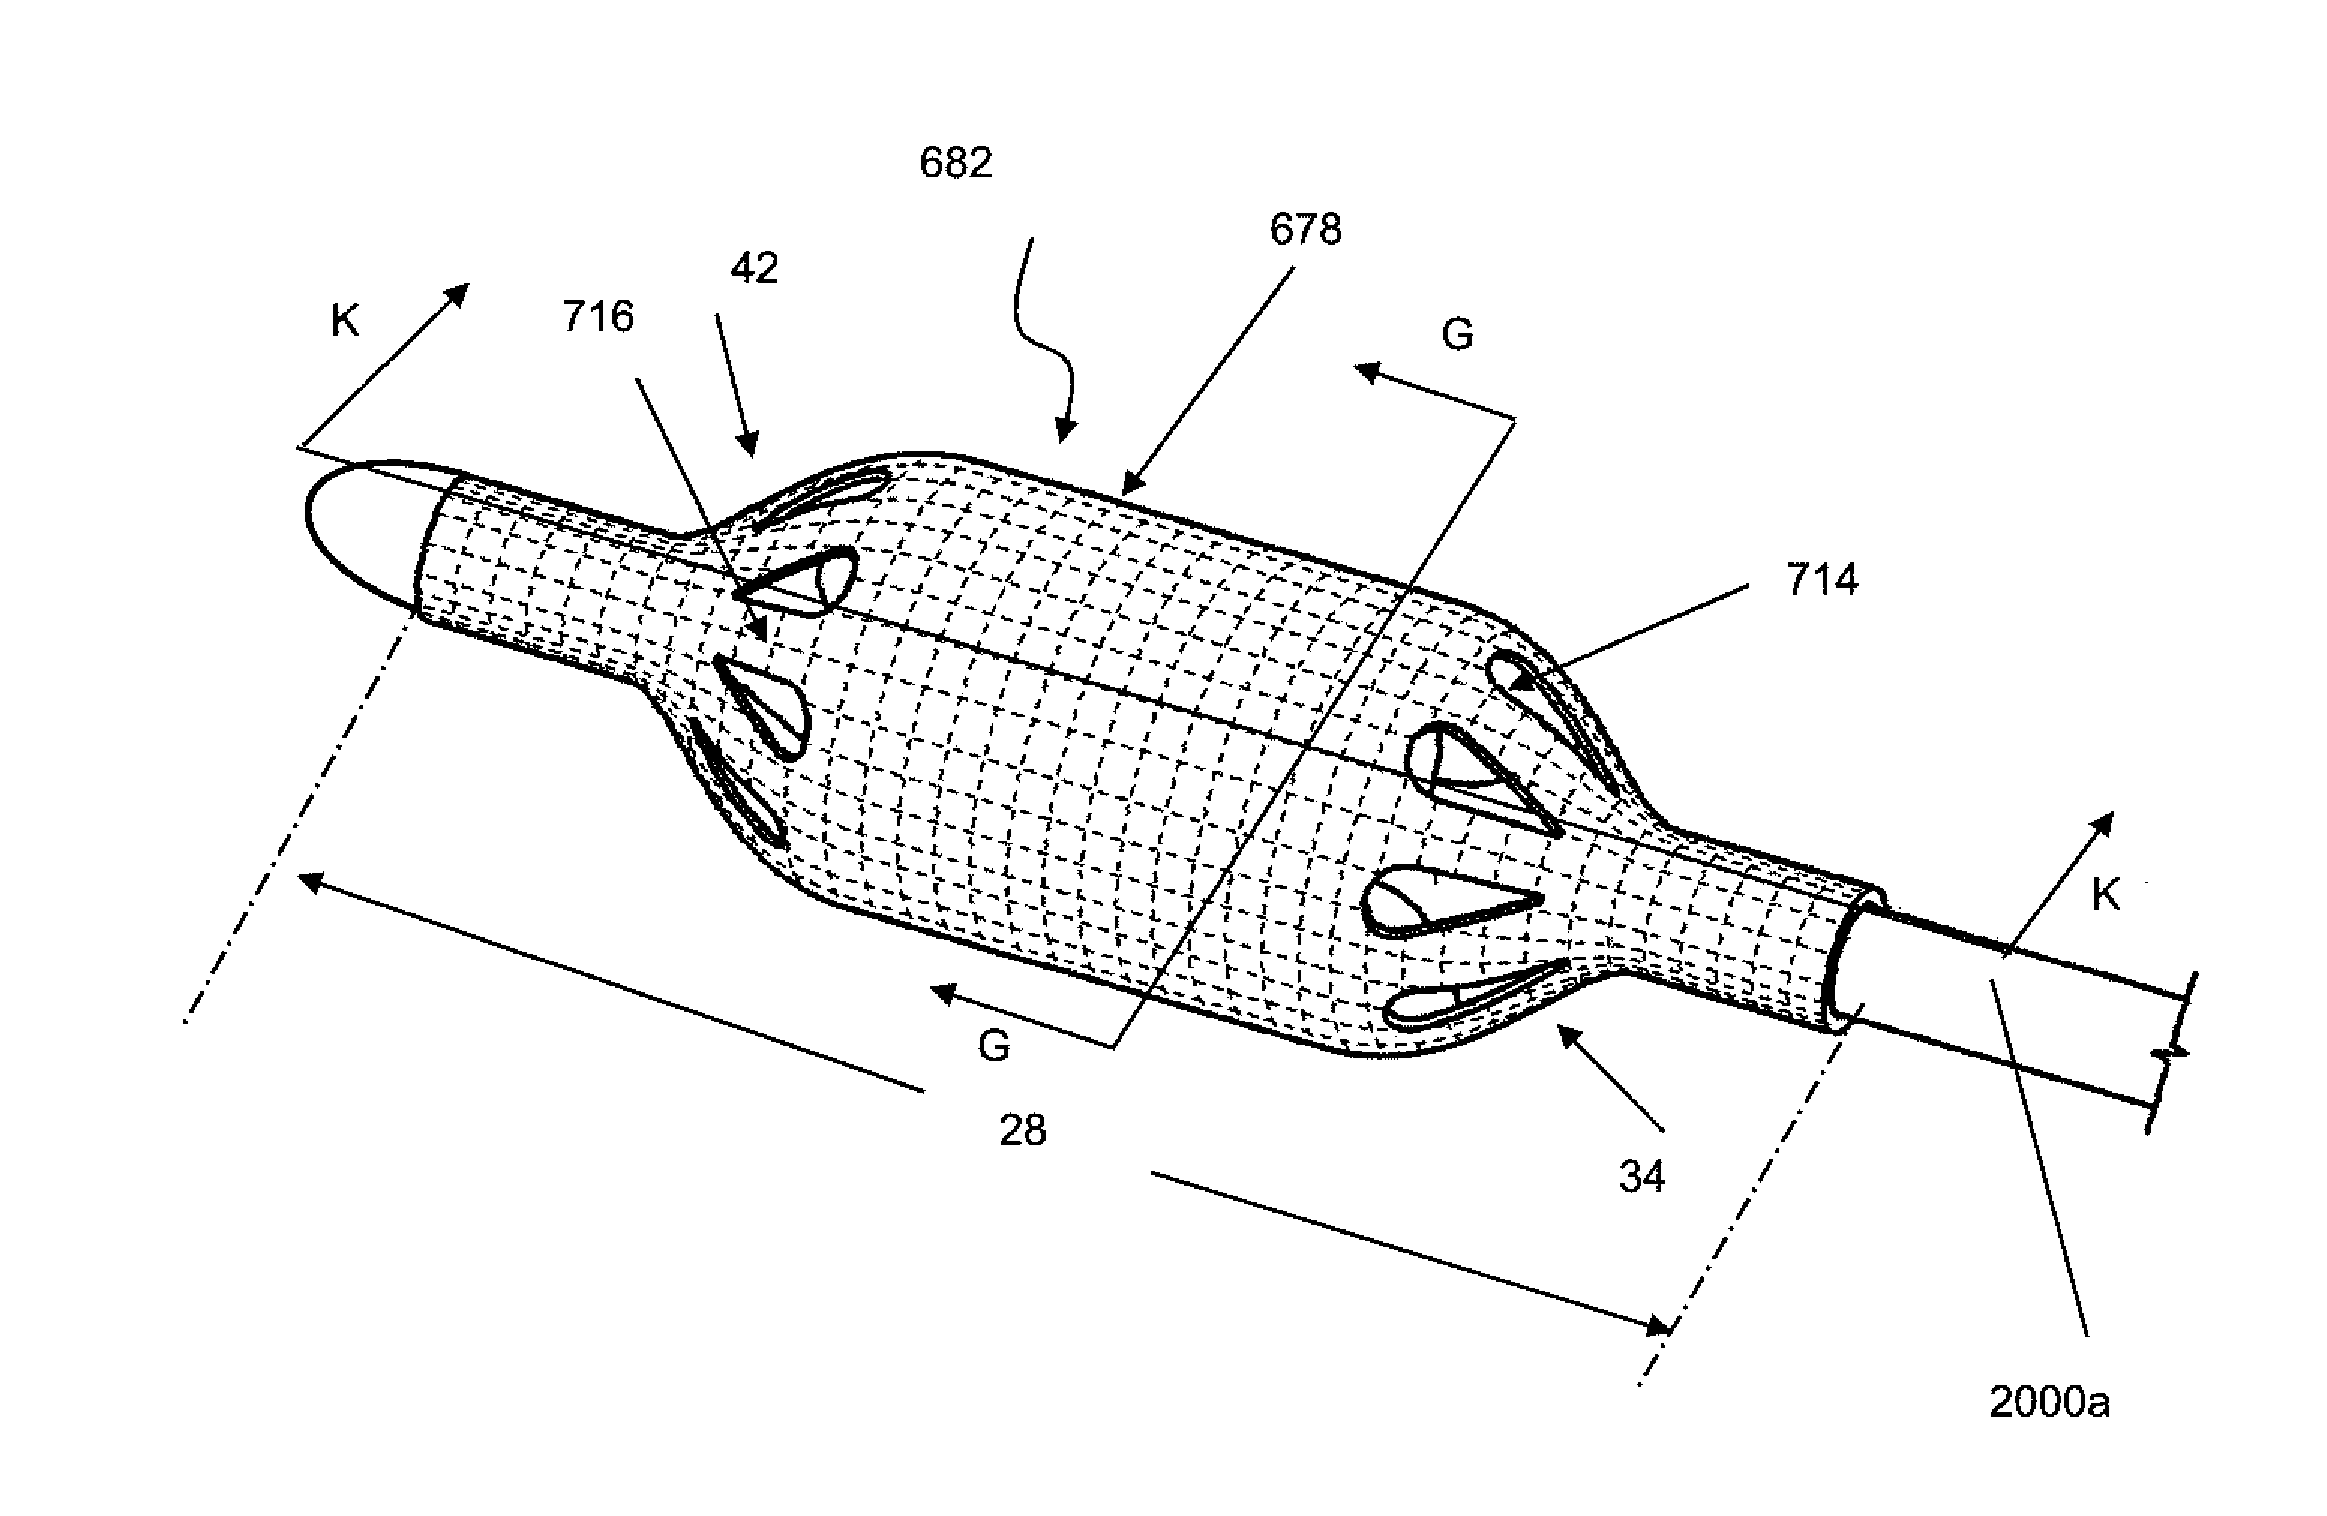 Reinforced inflatable medical devices